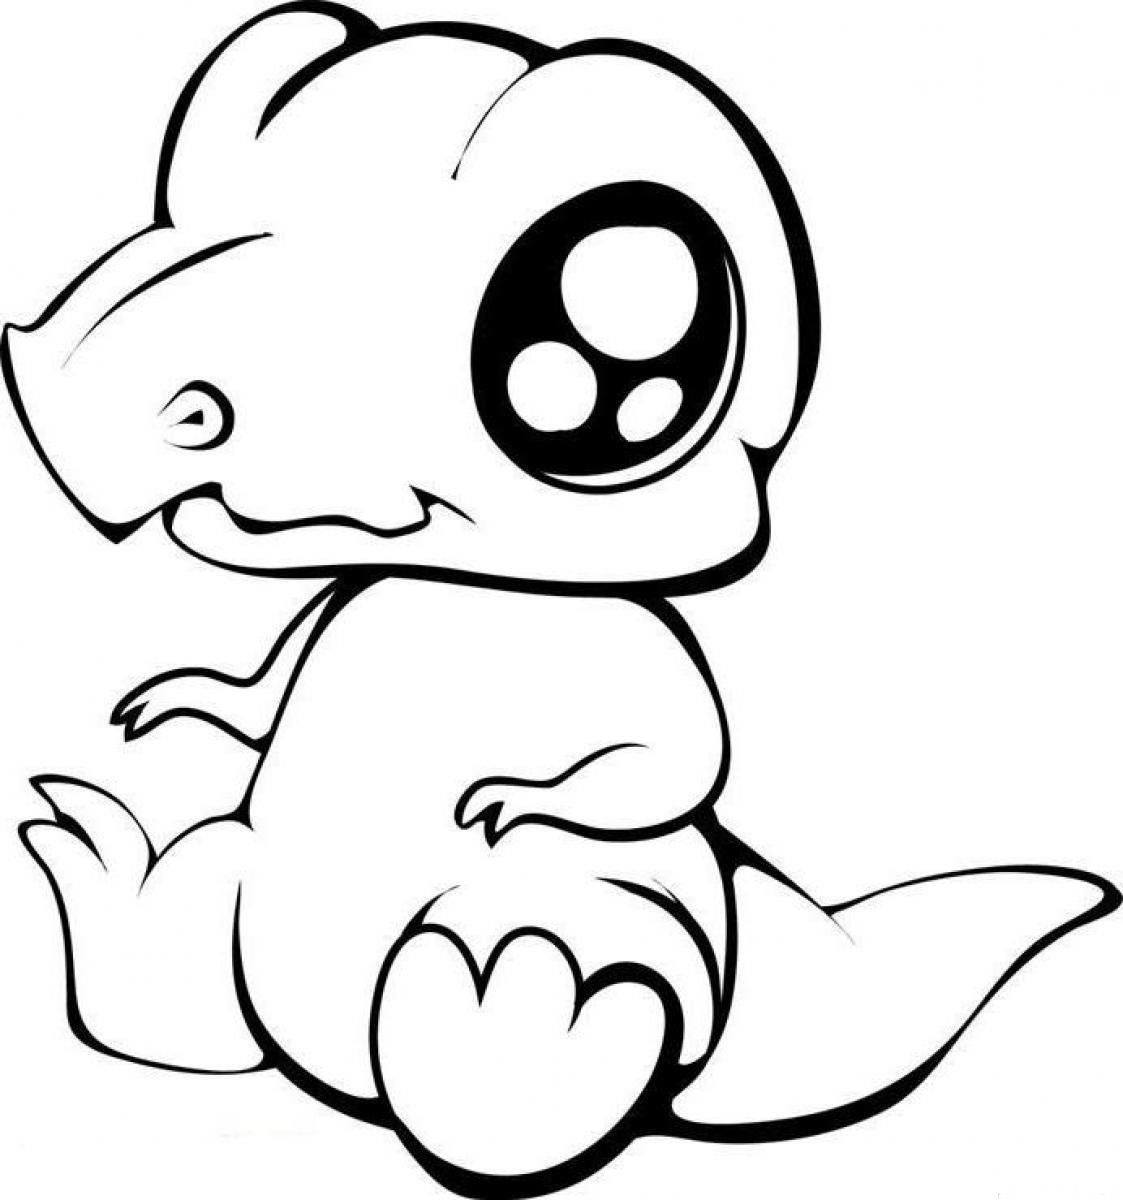 Cute Baby Animal Coloring Pages Dragoart Cute Animal Coloring ...